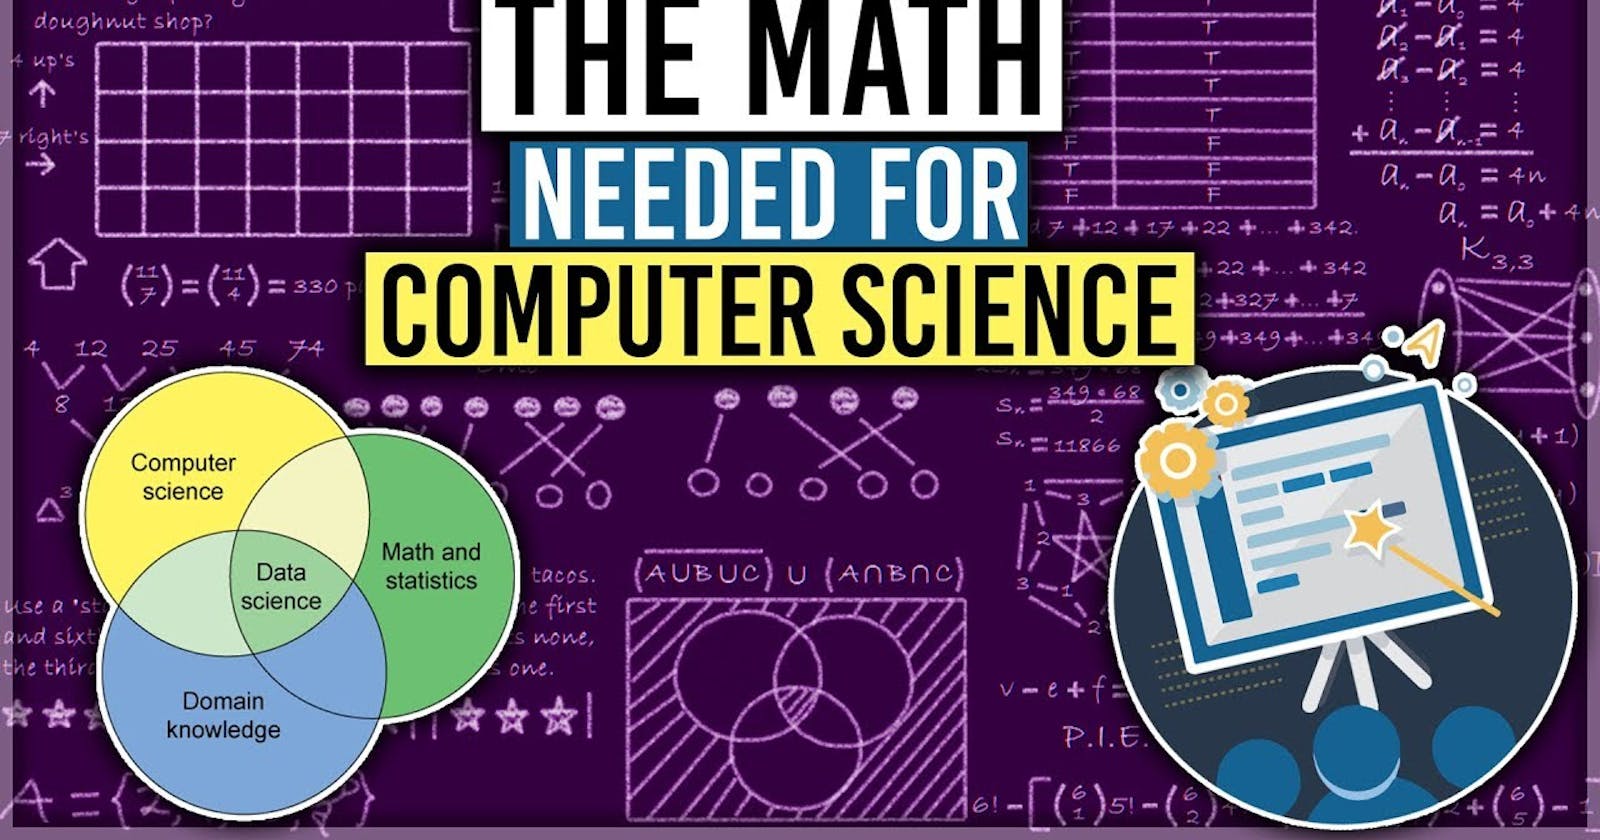 Is mathematics included in computer science?